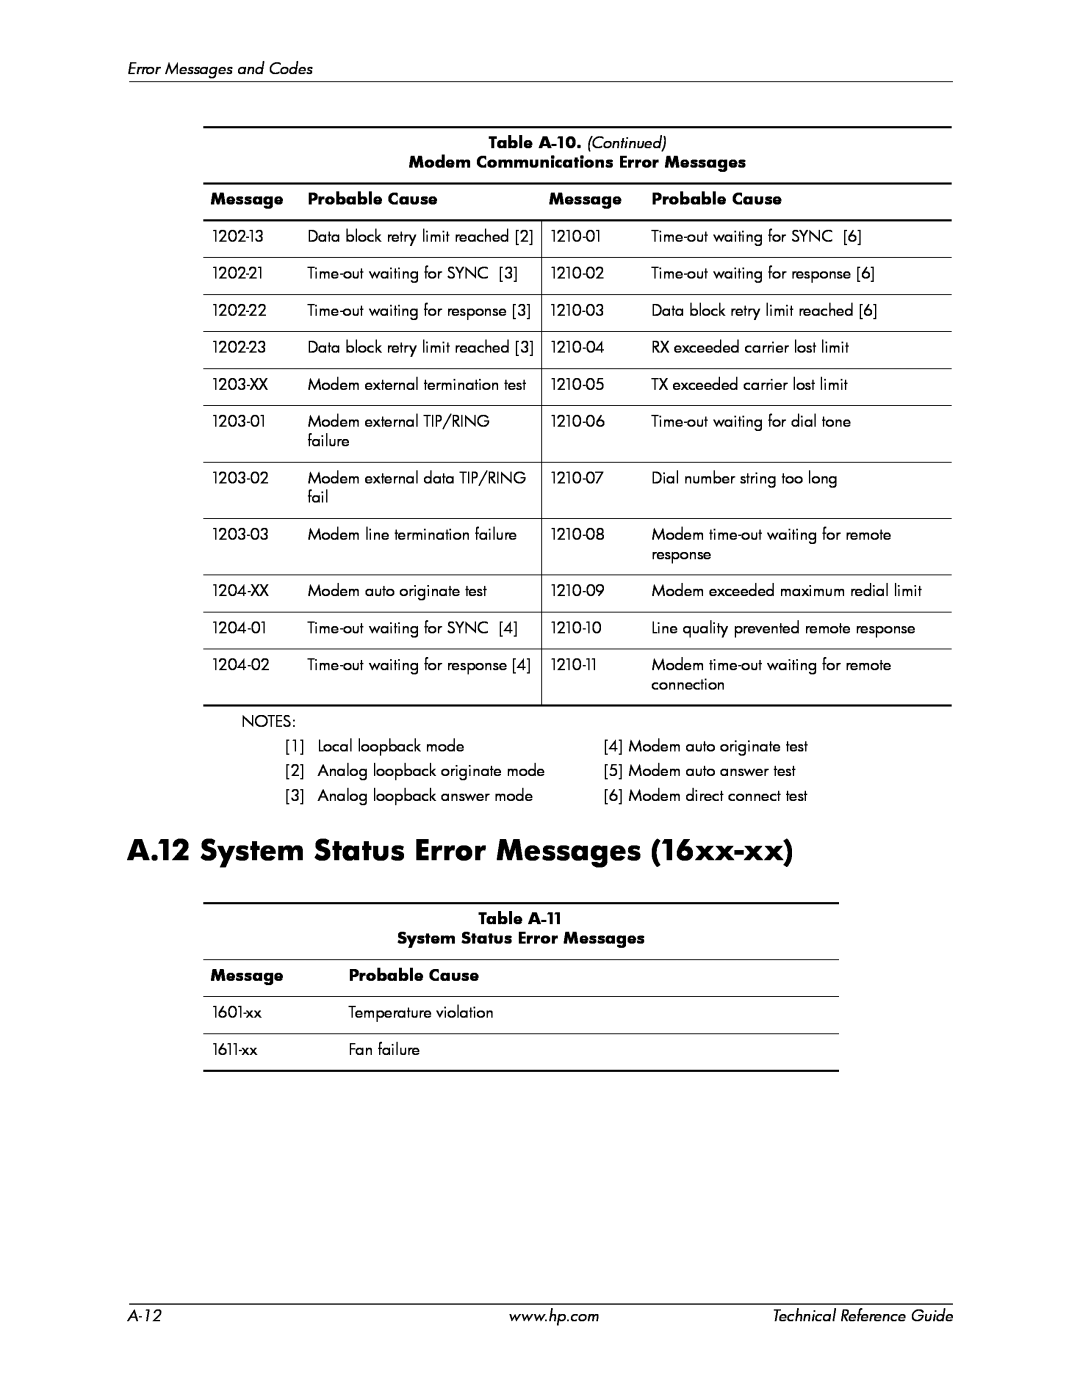 HP 8000 tower manual A.12 System Status Error Messages 